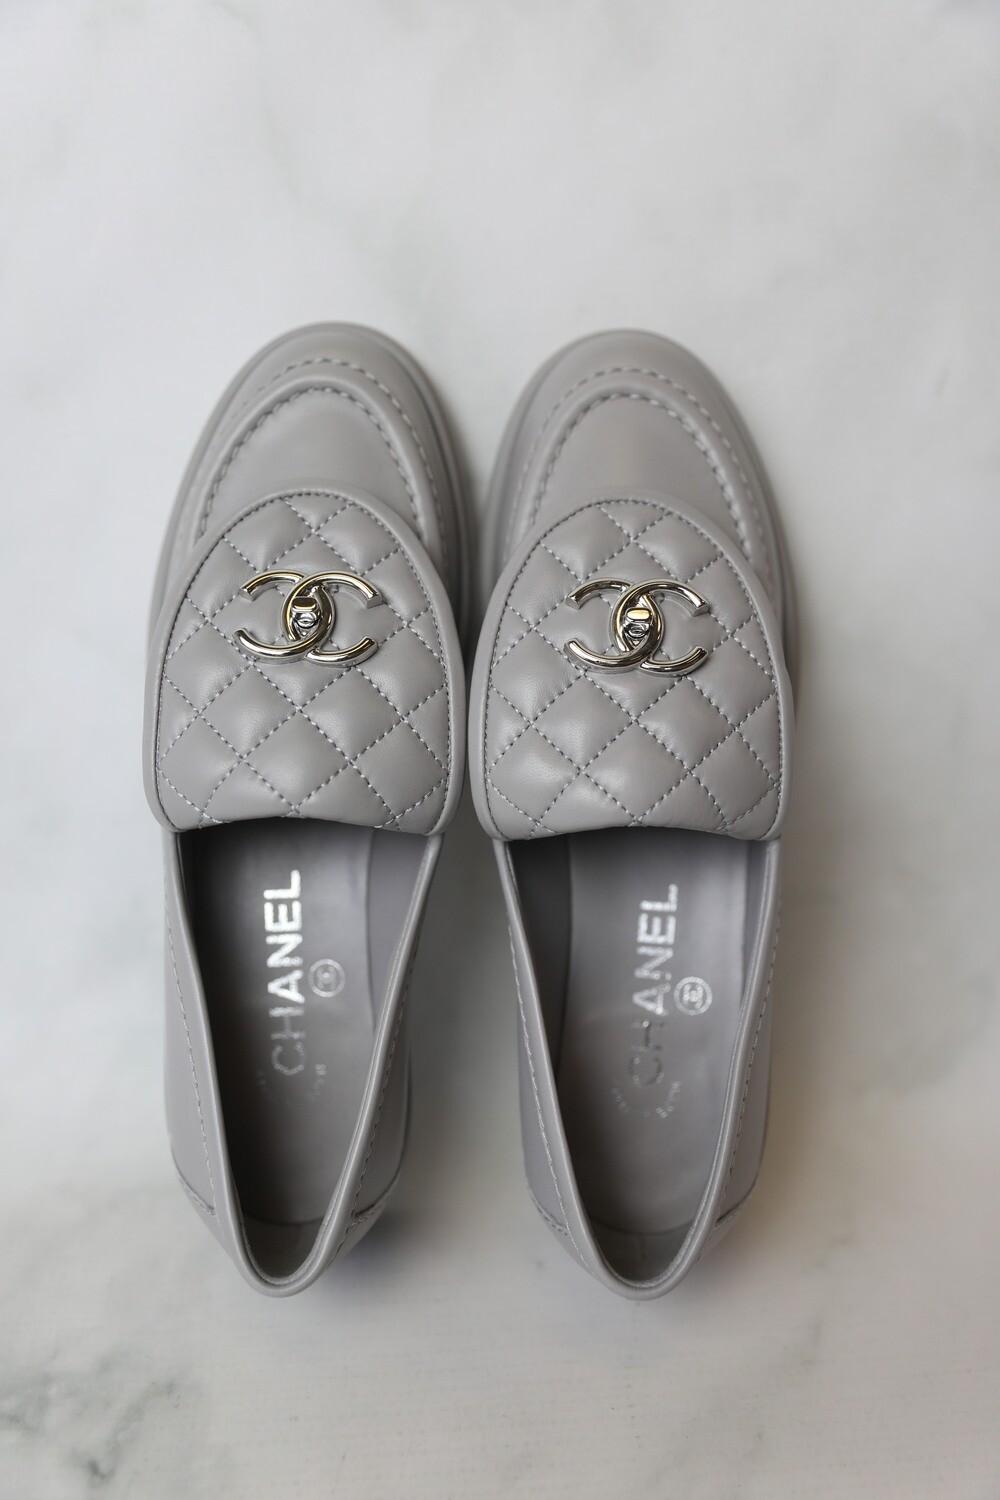 Chanel Quilted Black Leather Espadrilles - Size 38 EU / 8 US